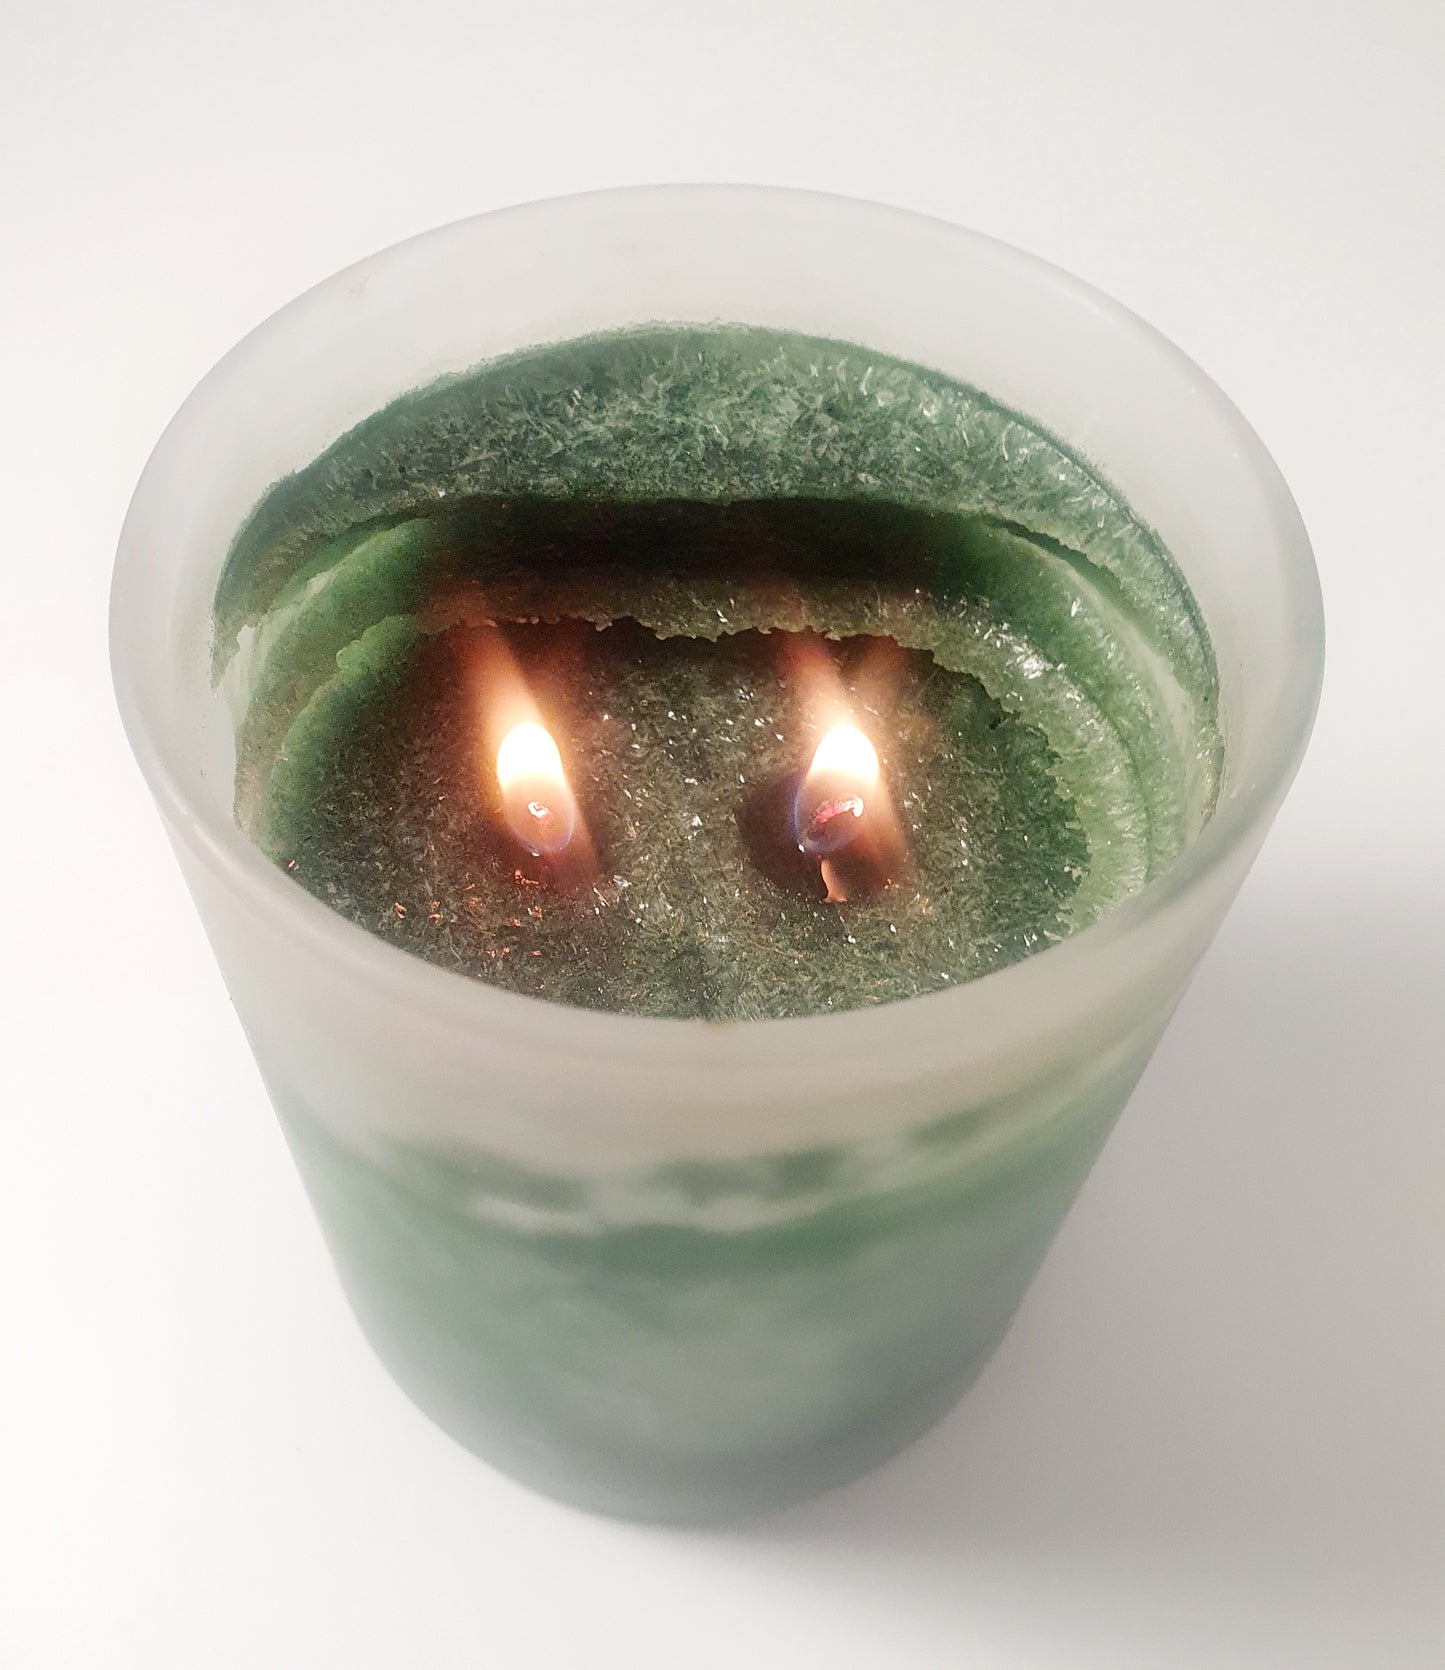 Christmas Scented Candles